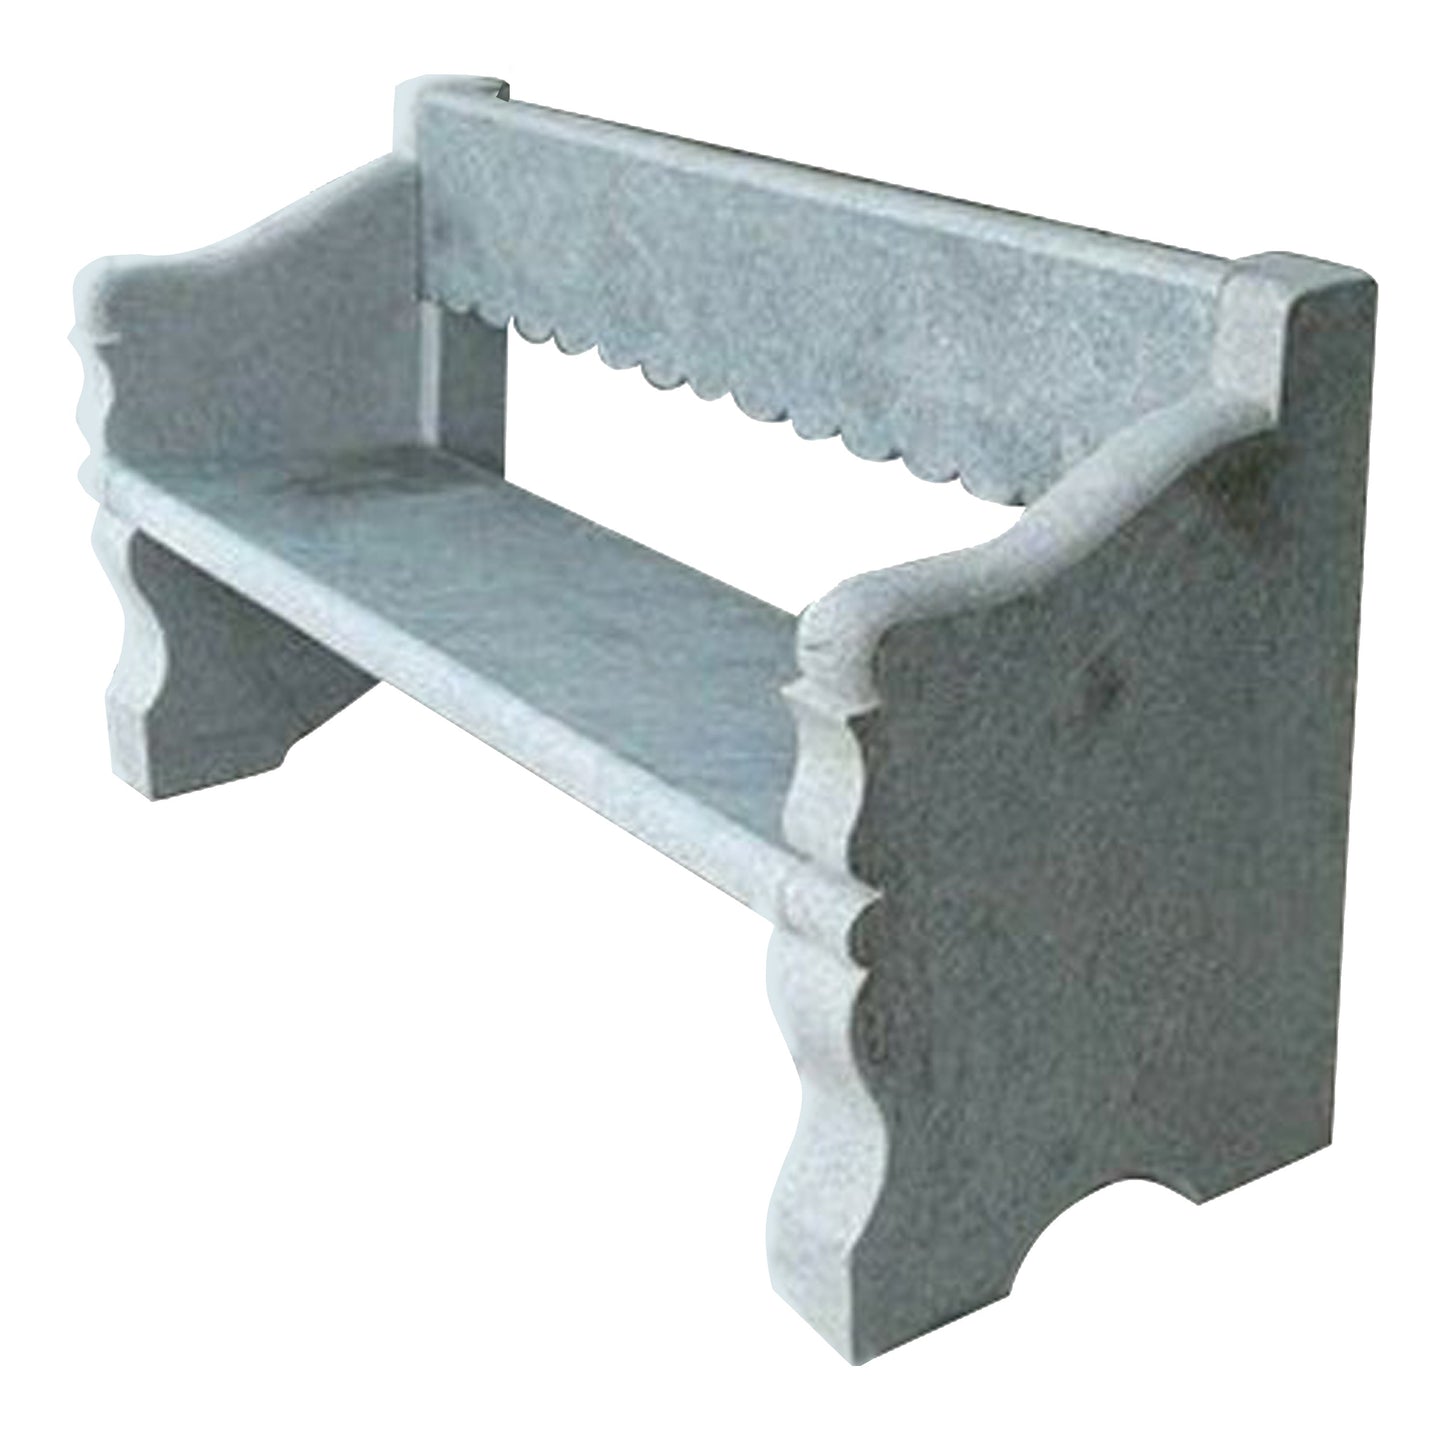 Artistic Carved Granite Garden Bench | Enhancing Outdoor Spaces | 5 Ft Long | 3 Inch Thickness Seater